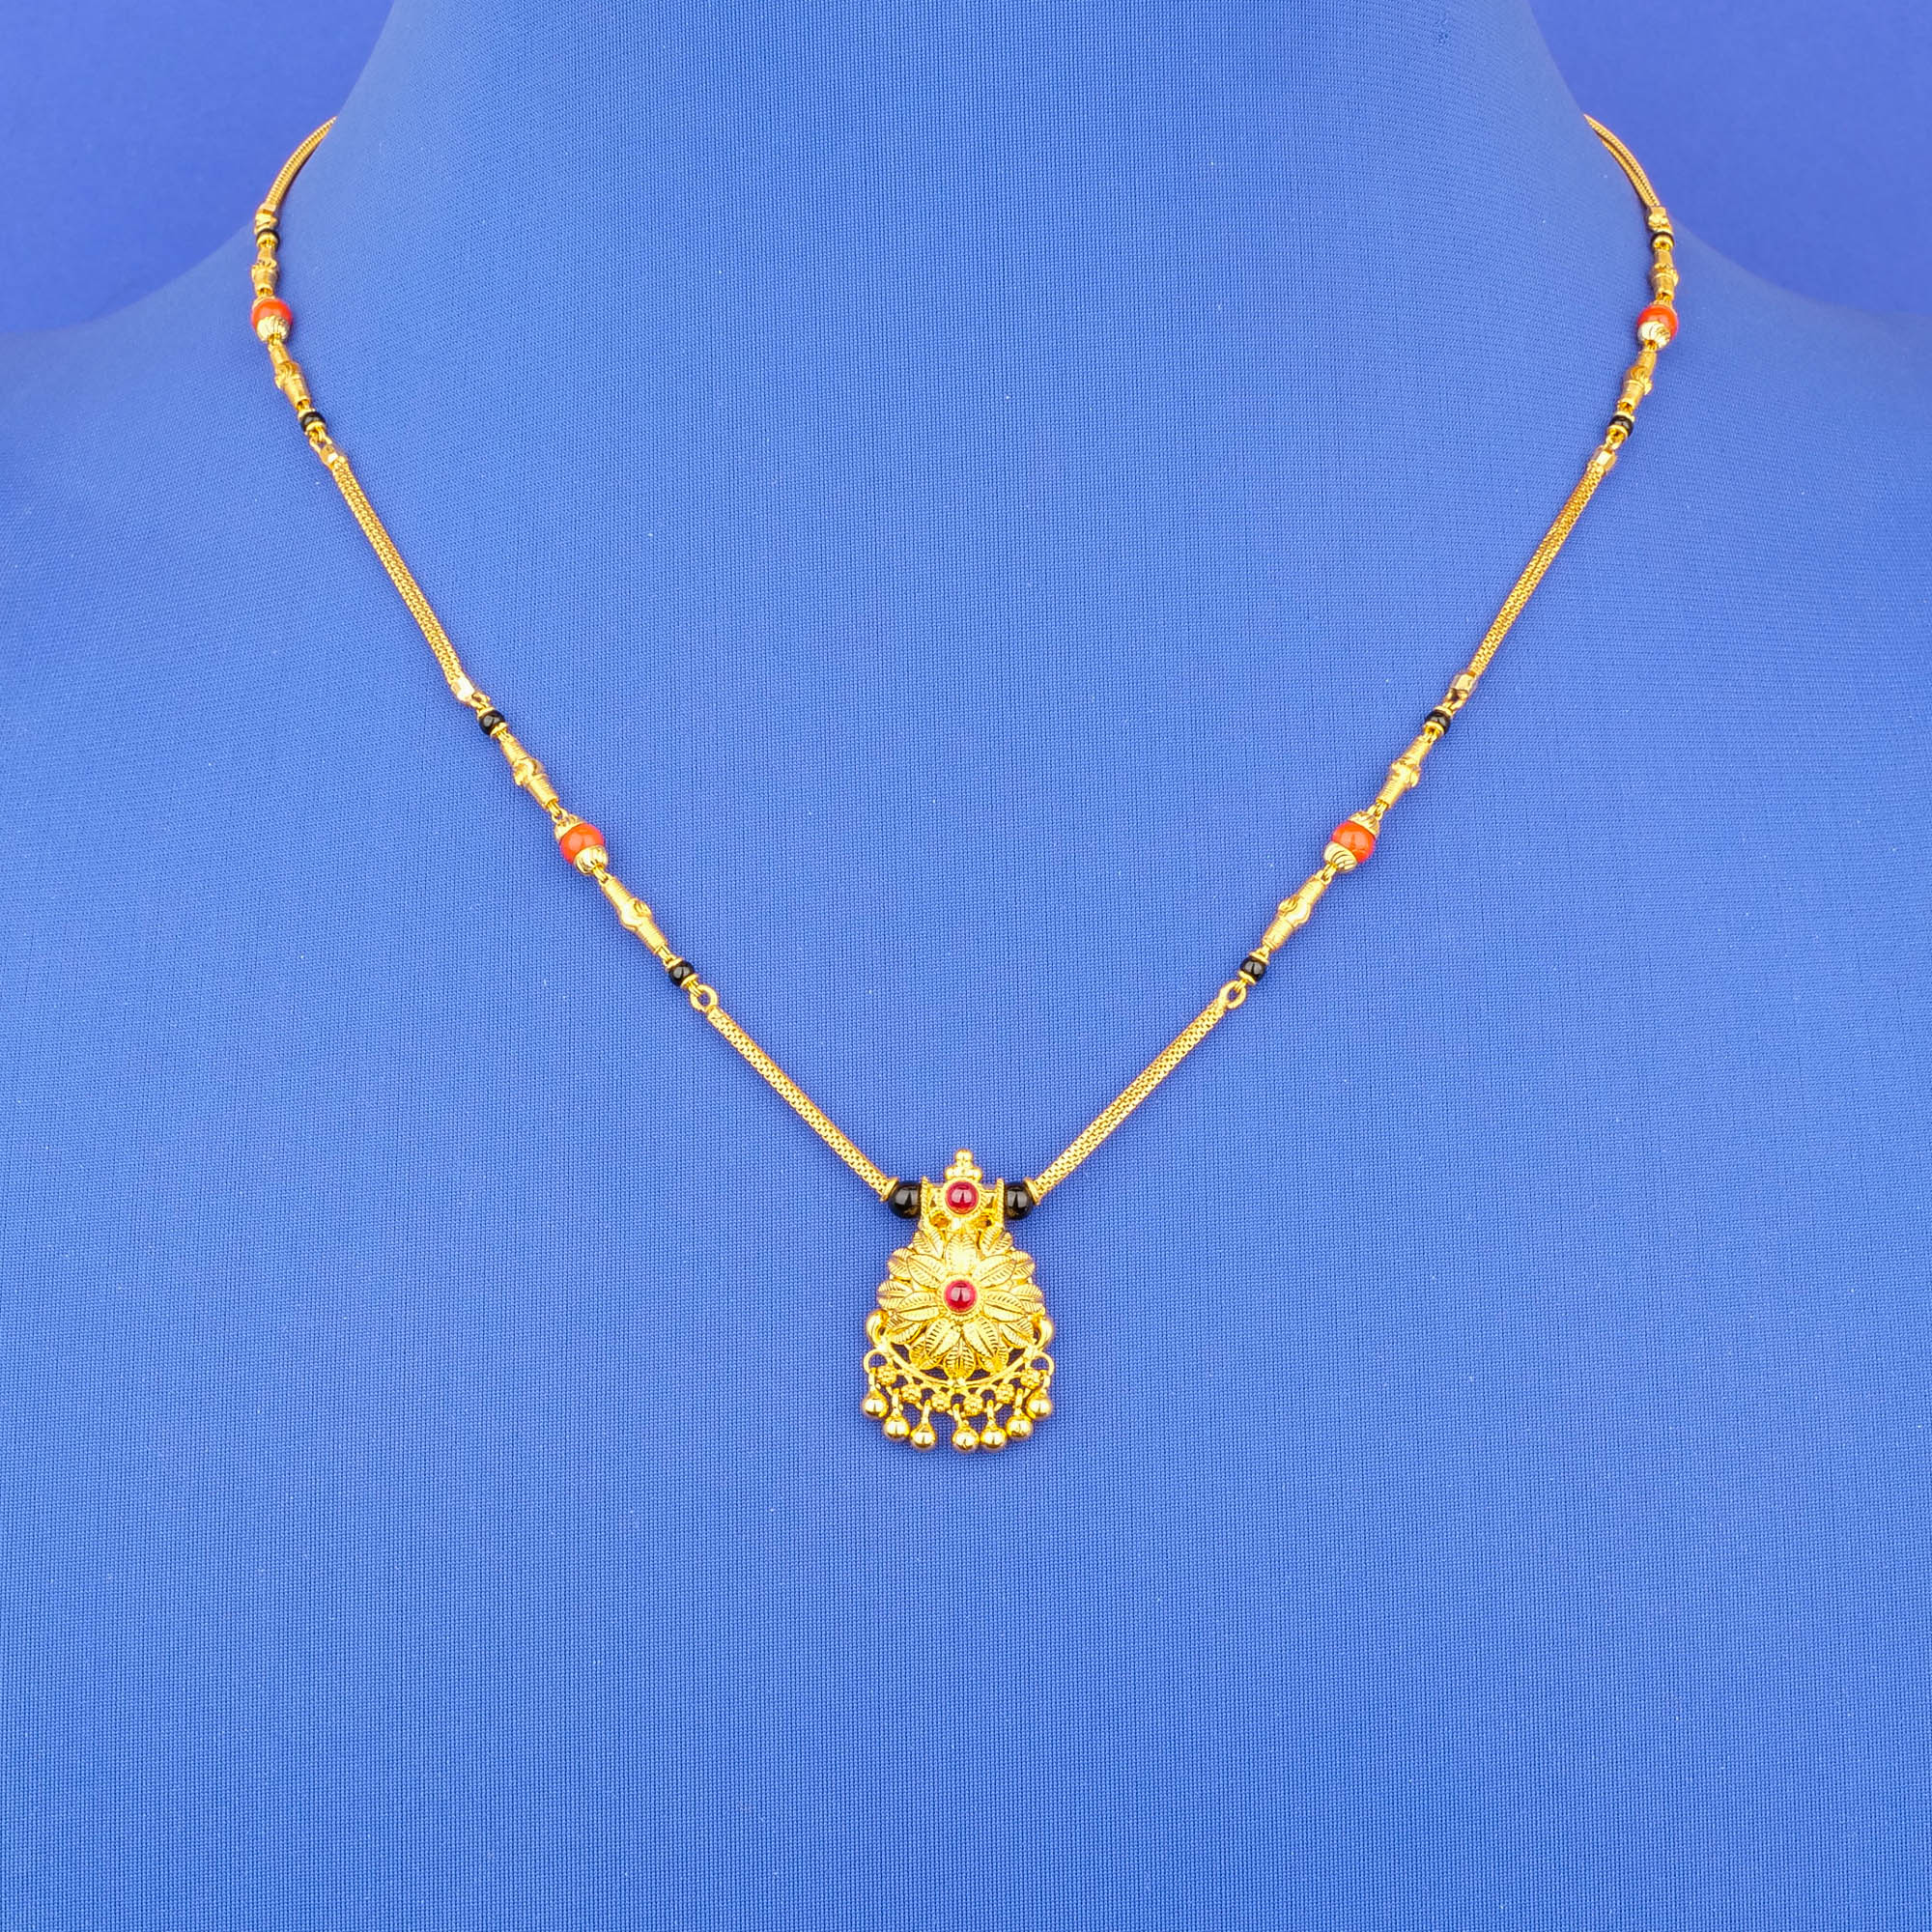 22k Gold and Coral Mangalsutra Necklace